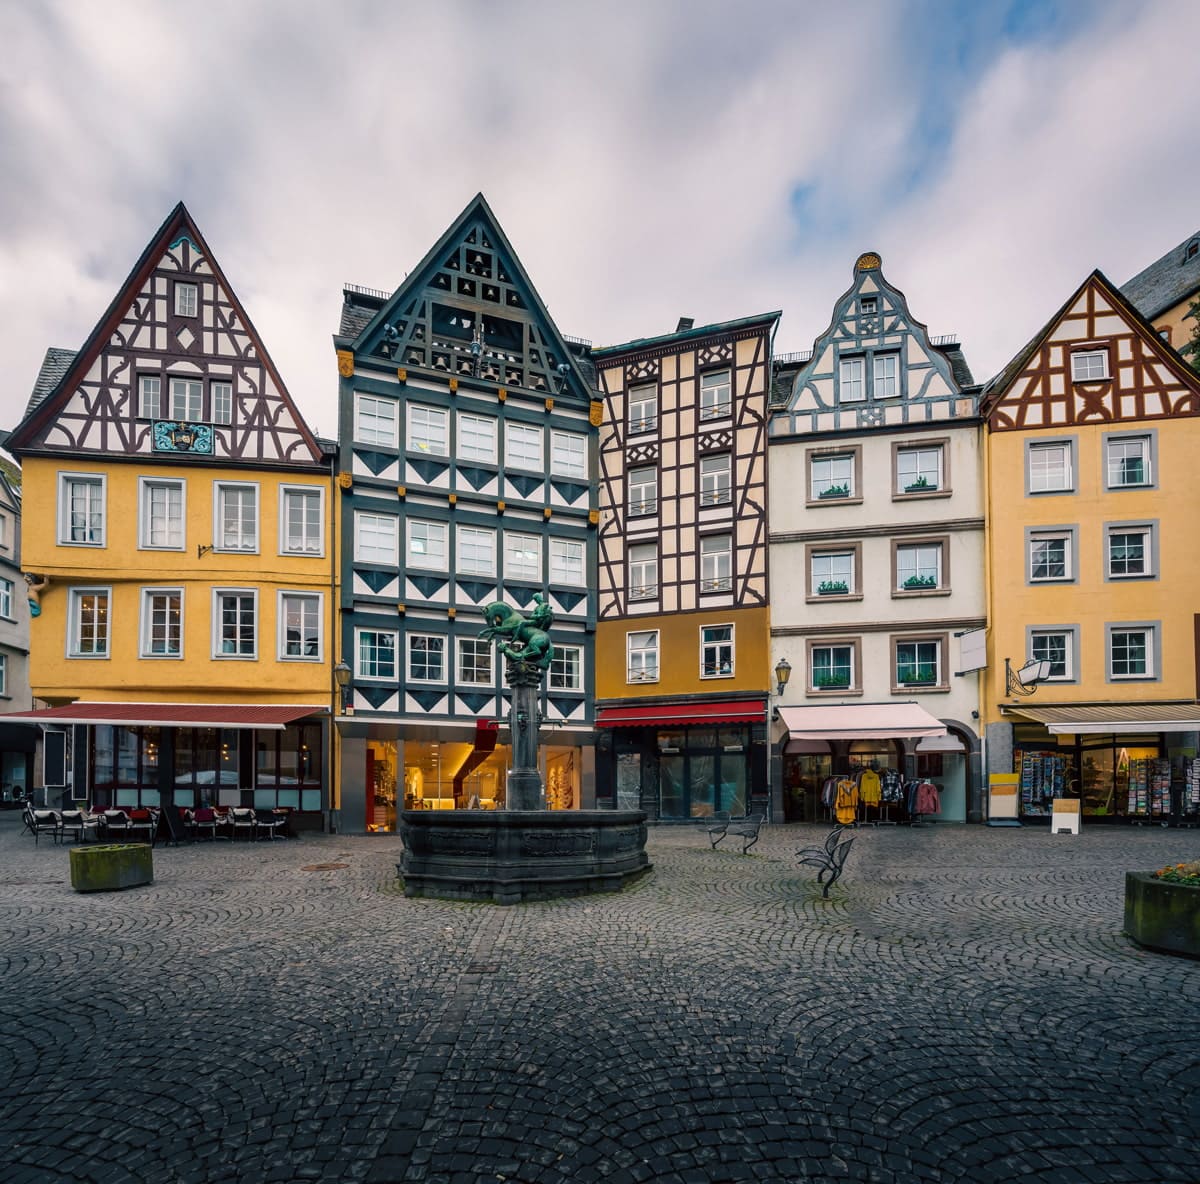 These Small Towns in Germany Look Straight Out of a Storybook